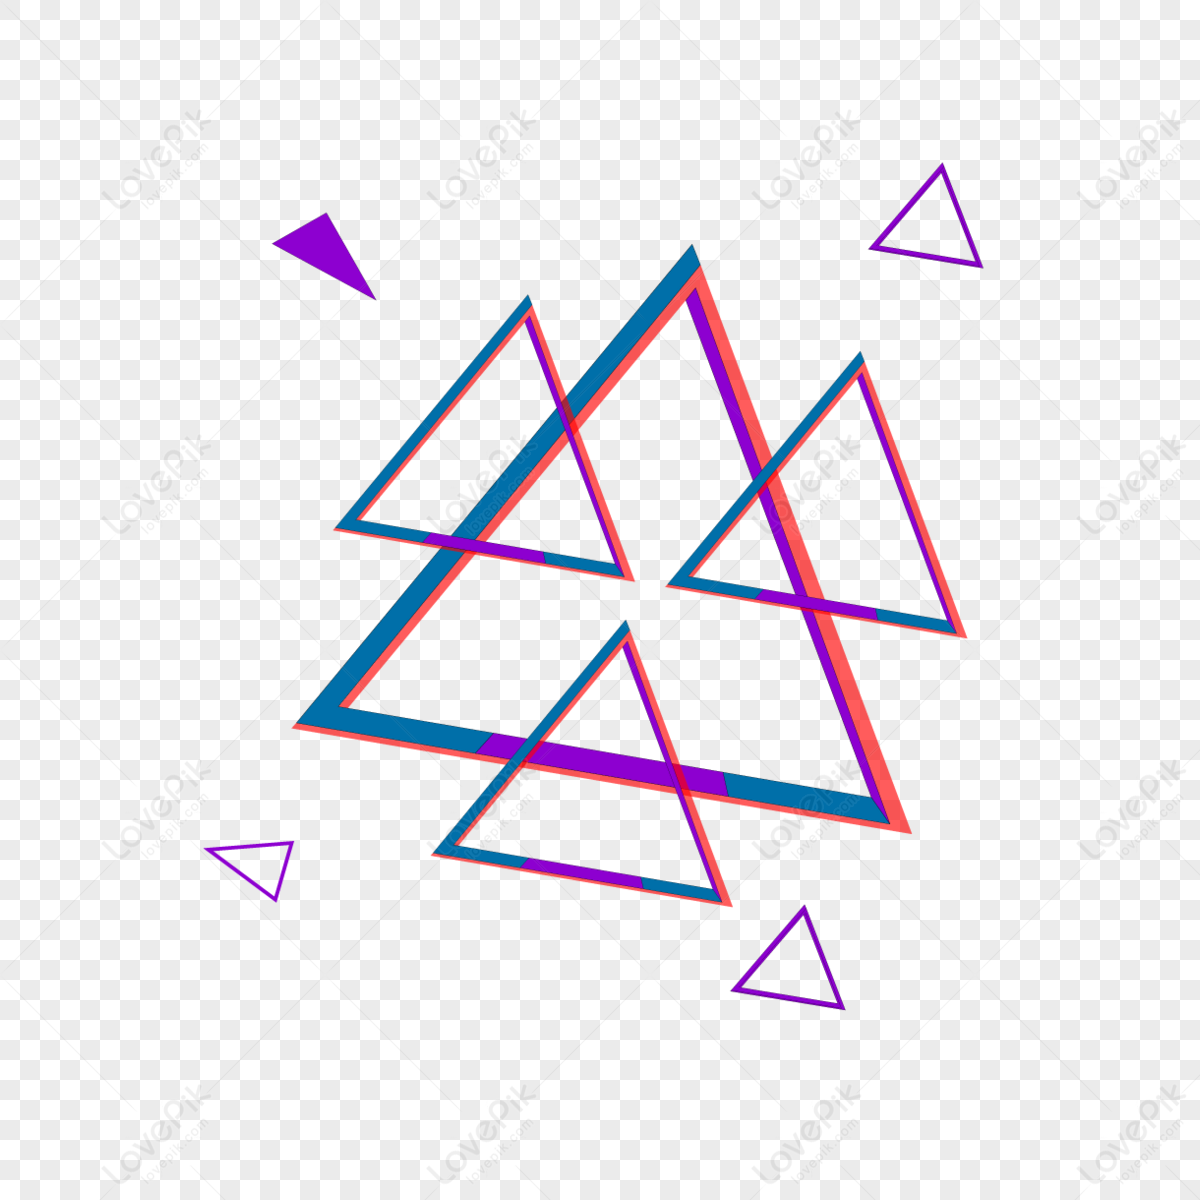 Triangles png images